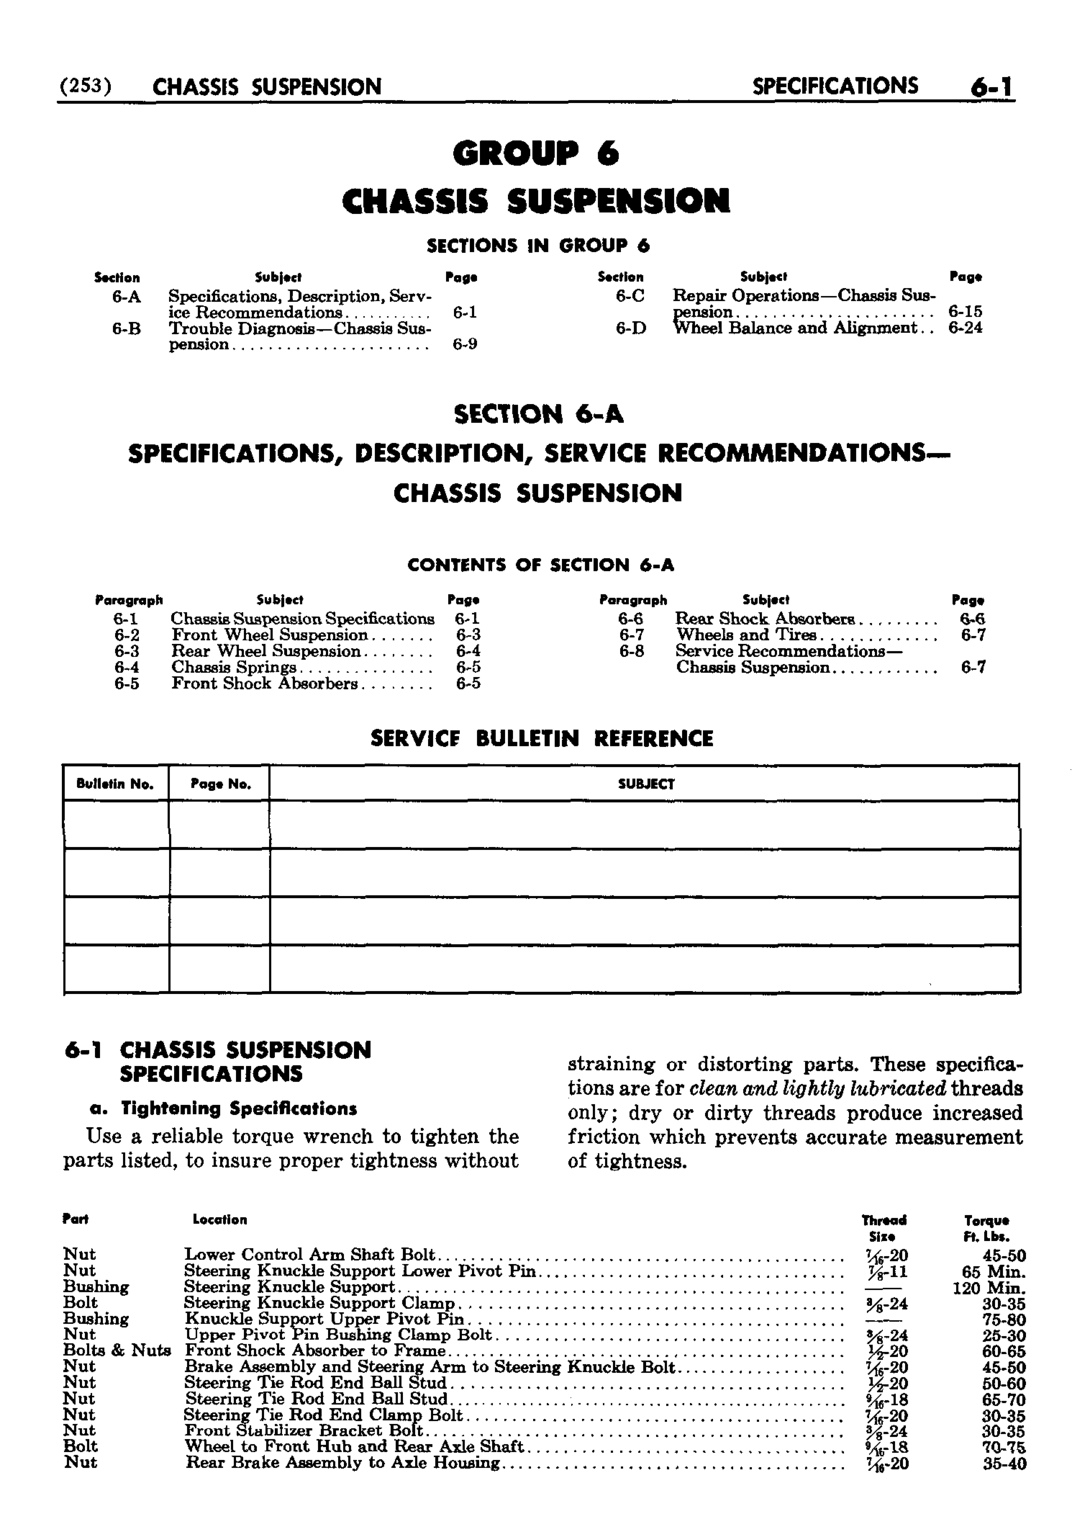 n_07 1952 Buick Shop Manual - Chassis Suspension-001-001.jpg